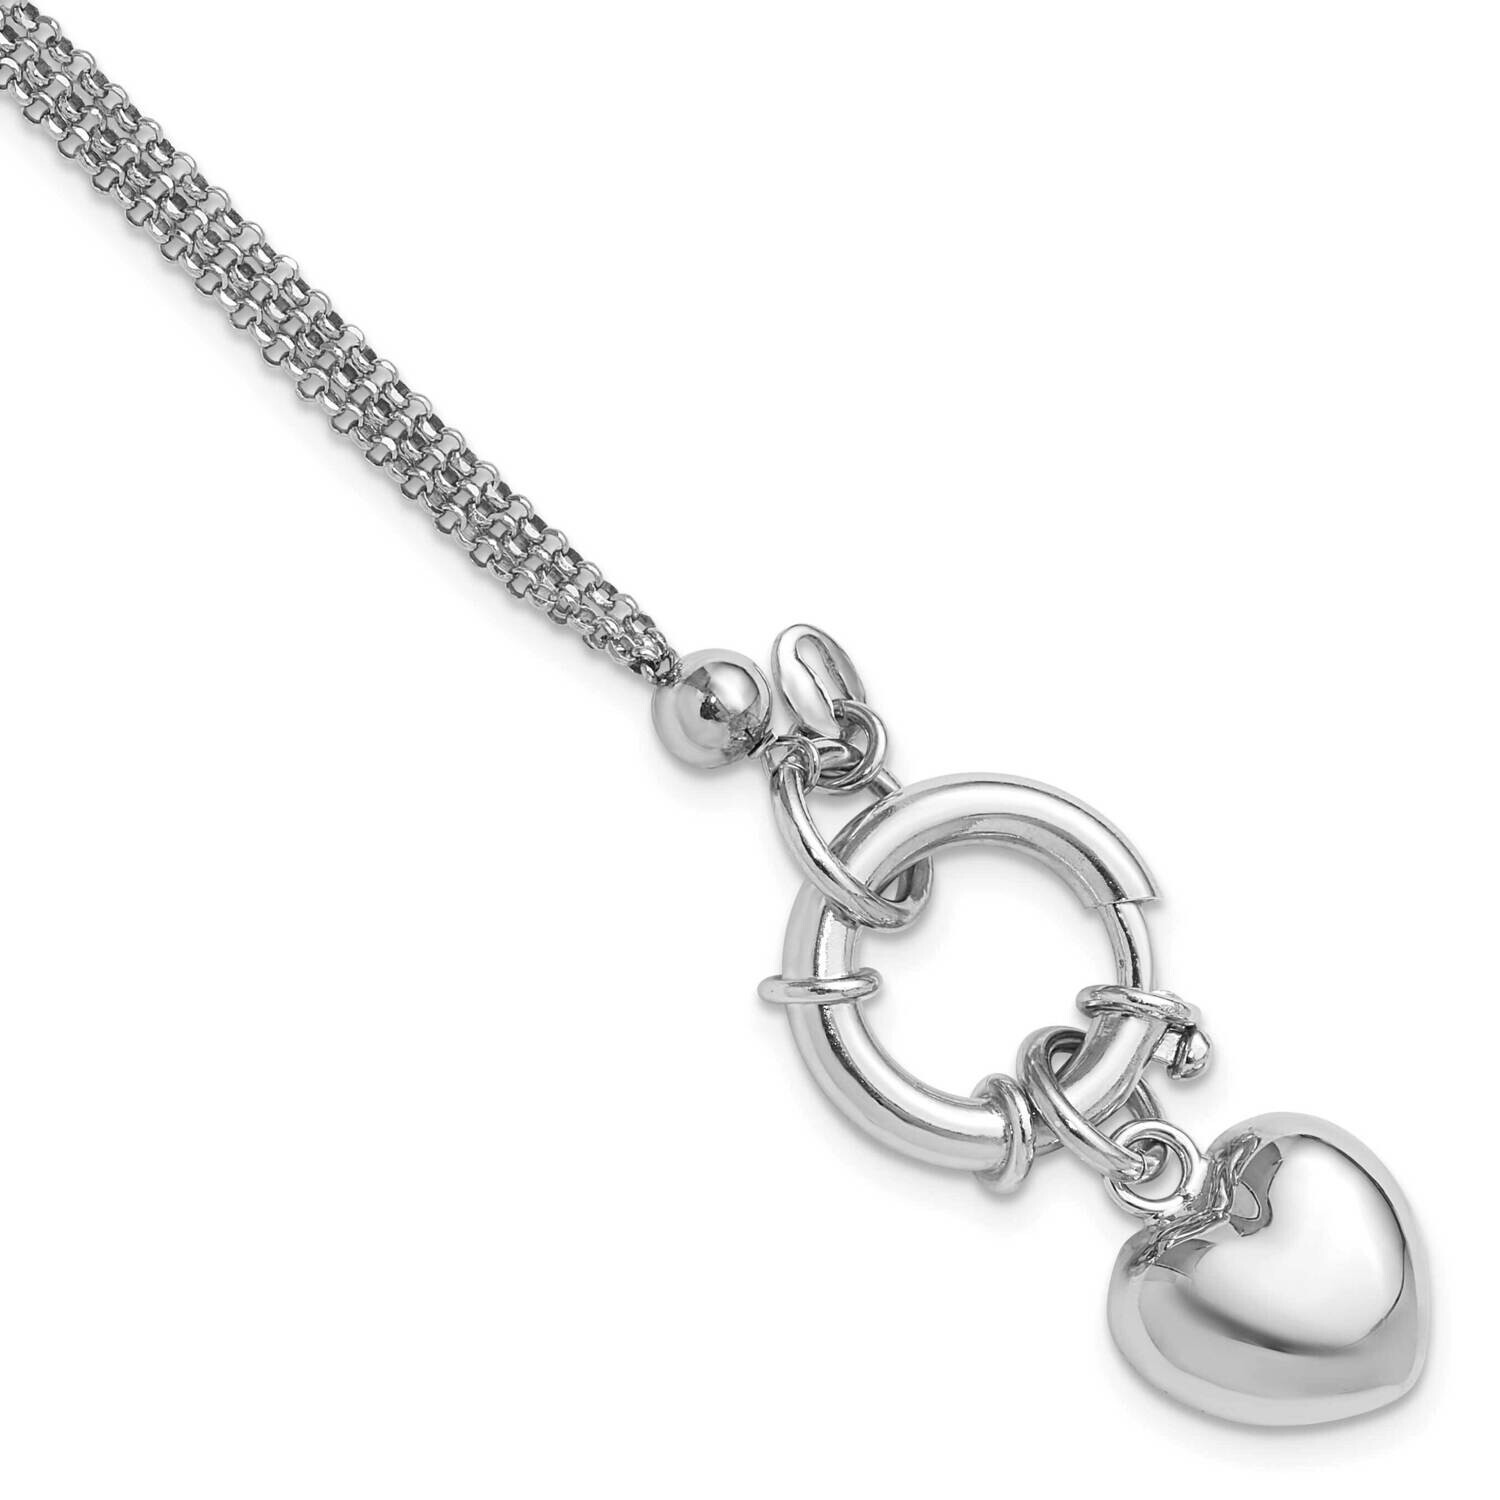 Rhod-Plated Polished Puff Heart Dangle 6.5 Inch Bracelet Sterling Silver QG6356-6.5